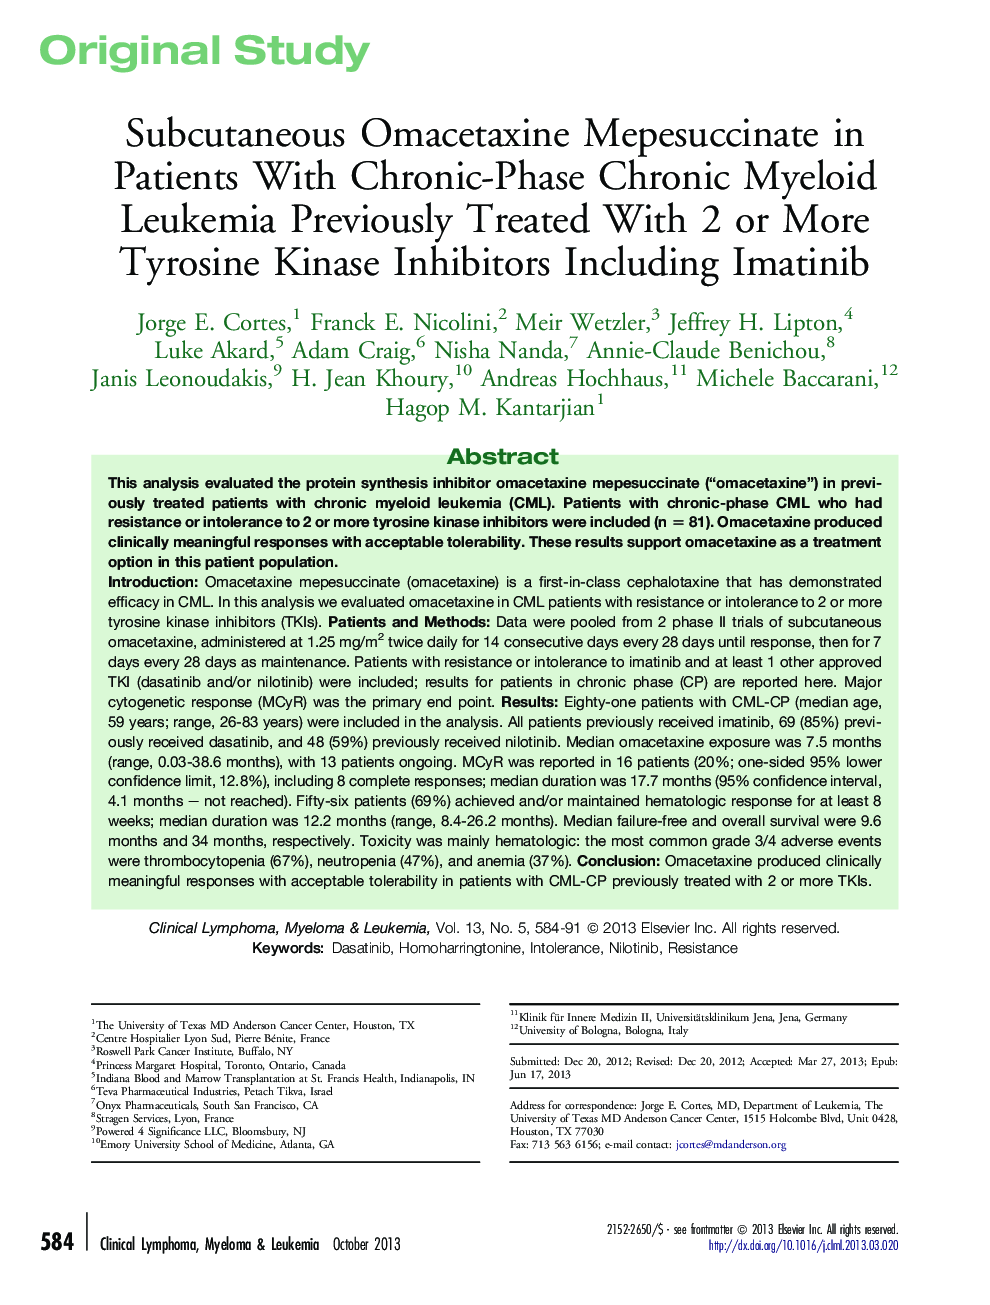 Subcutaneous Omacetaxine Mepesuccinate in Patients With Chronic-Phase Chronic Myeloid Leukemia Previously Treated With 2 or More Tyrosine Kinase Inhibitors Including Imatinib